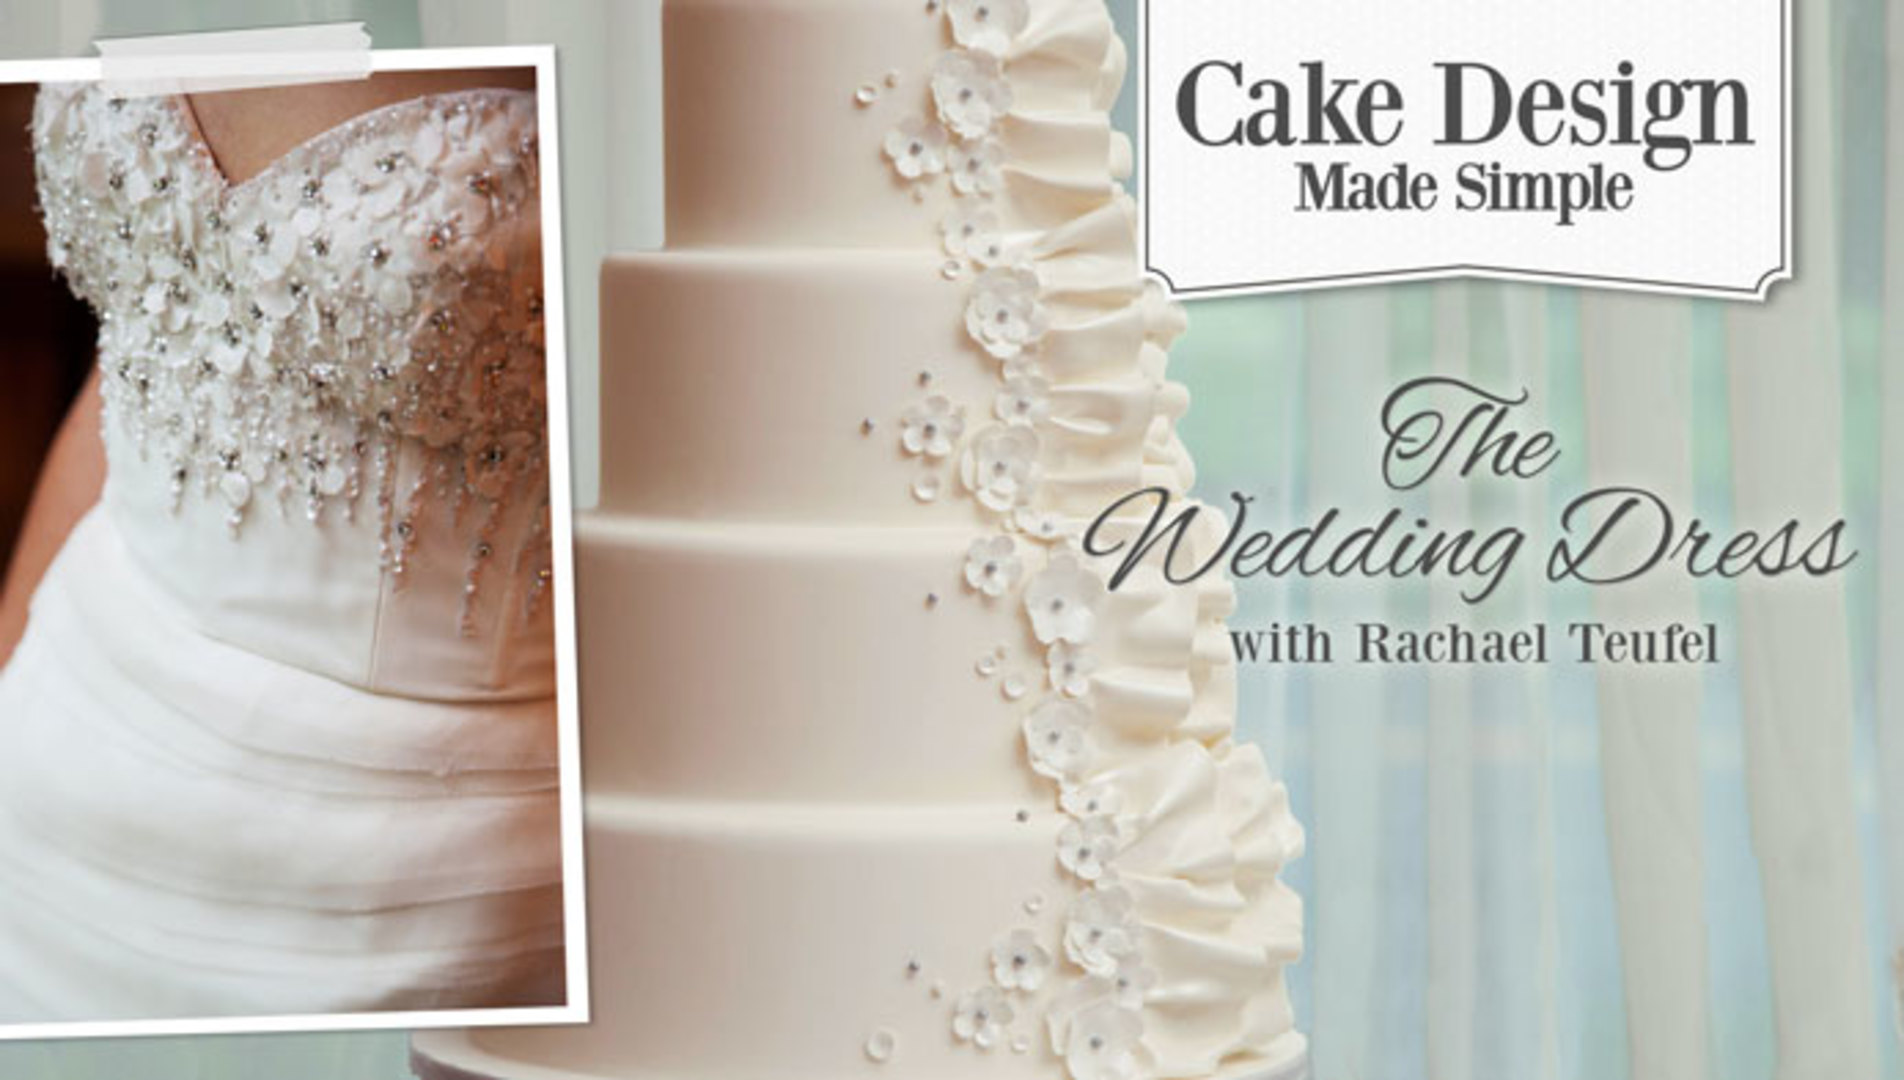 Wedding dress picture and cake